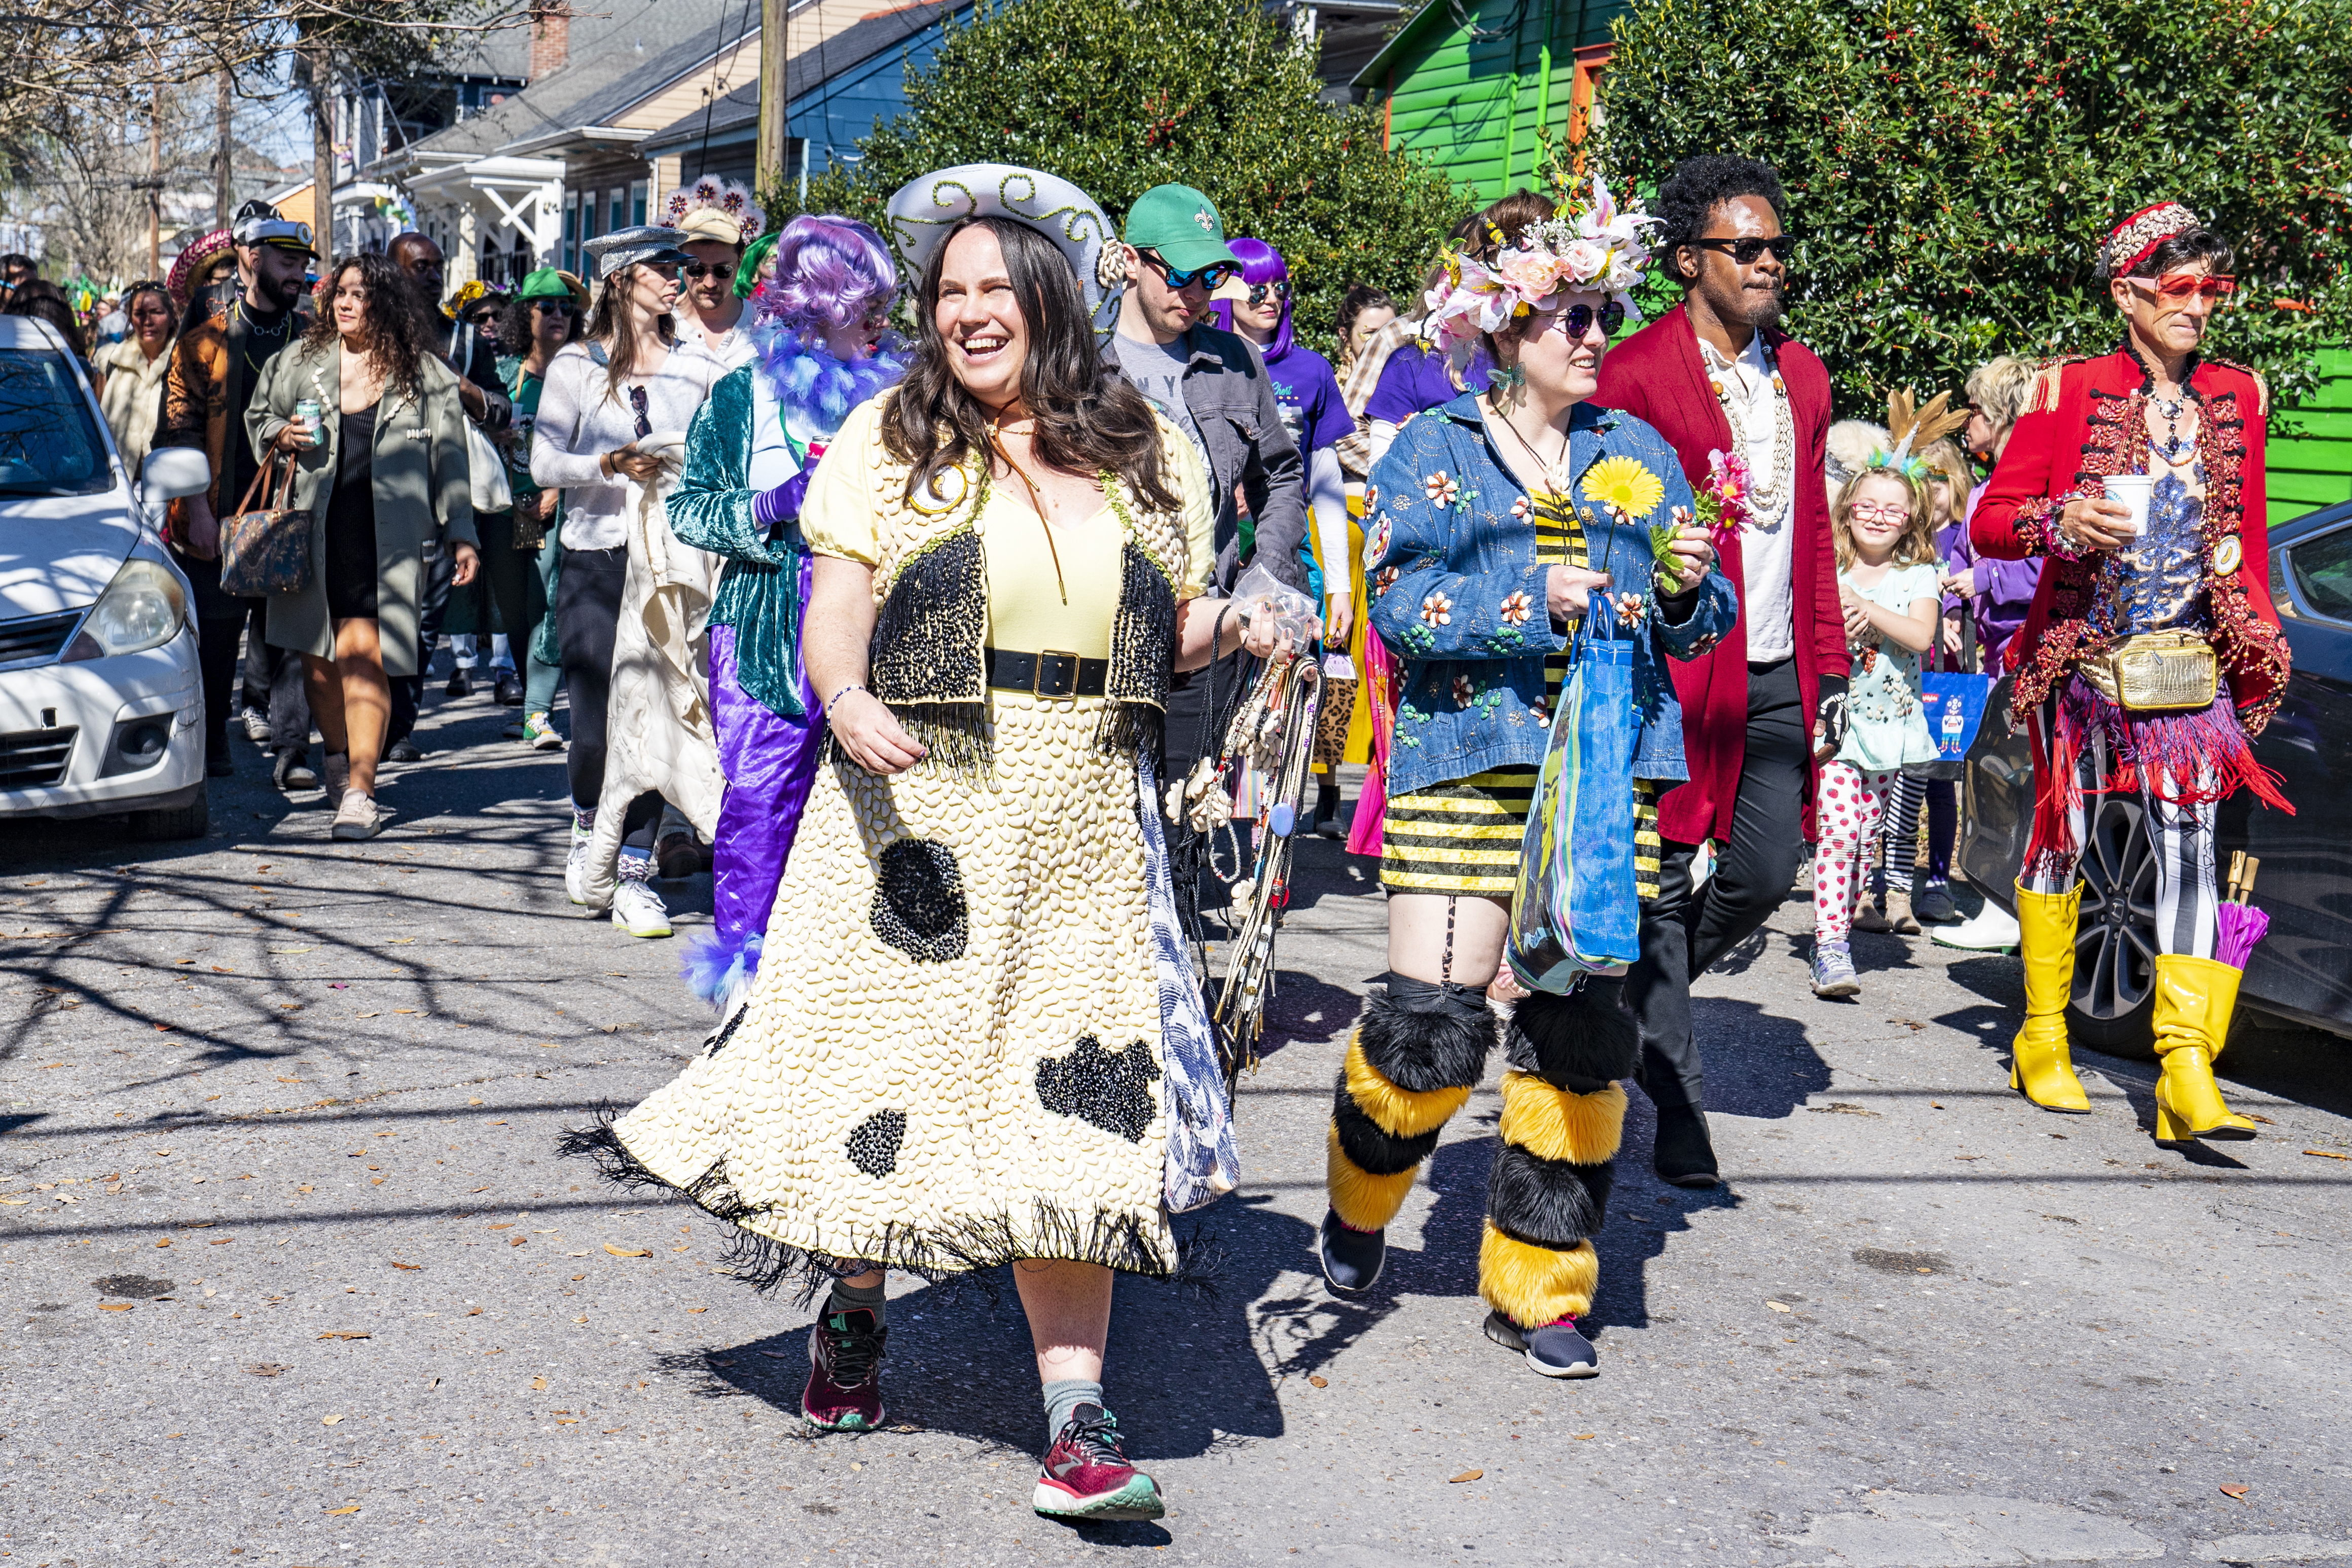 Costumed revelers participate in the Krewe of Red Beans parade through the Bywater on February 28, 2022 in New Orleans, Louisiana. The krewe uses beans to decorate homemade costumes for its second-line style walking parades